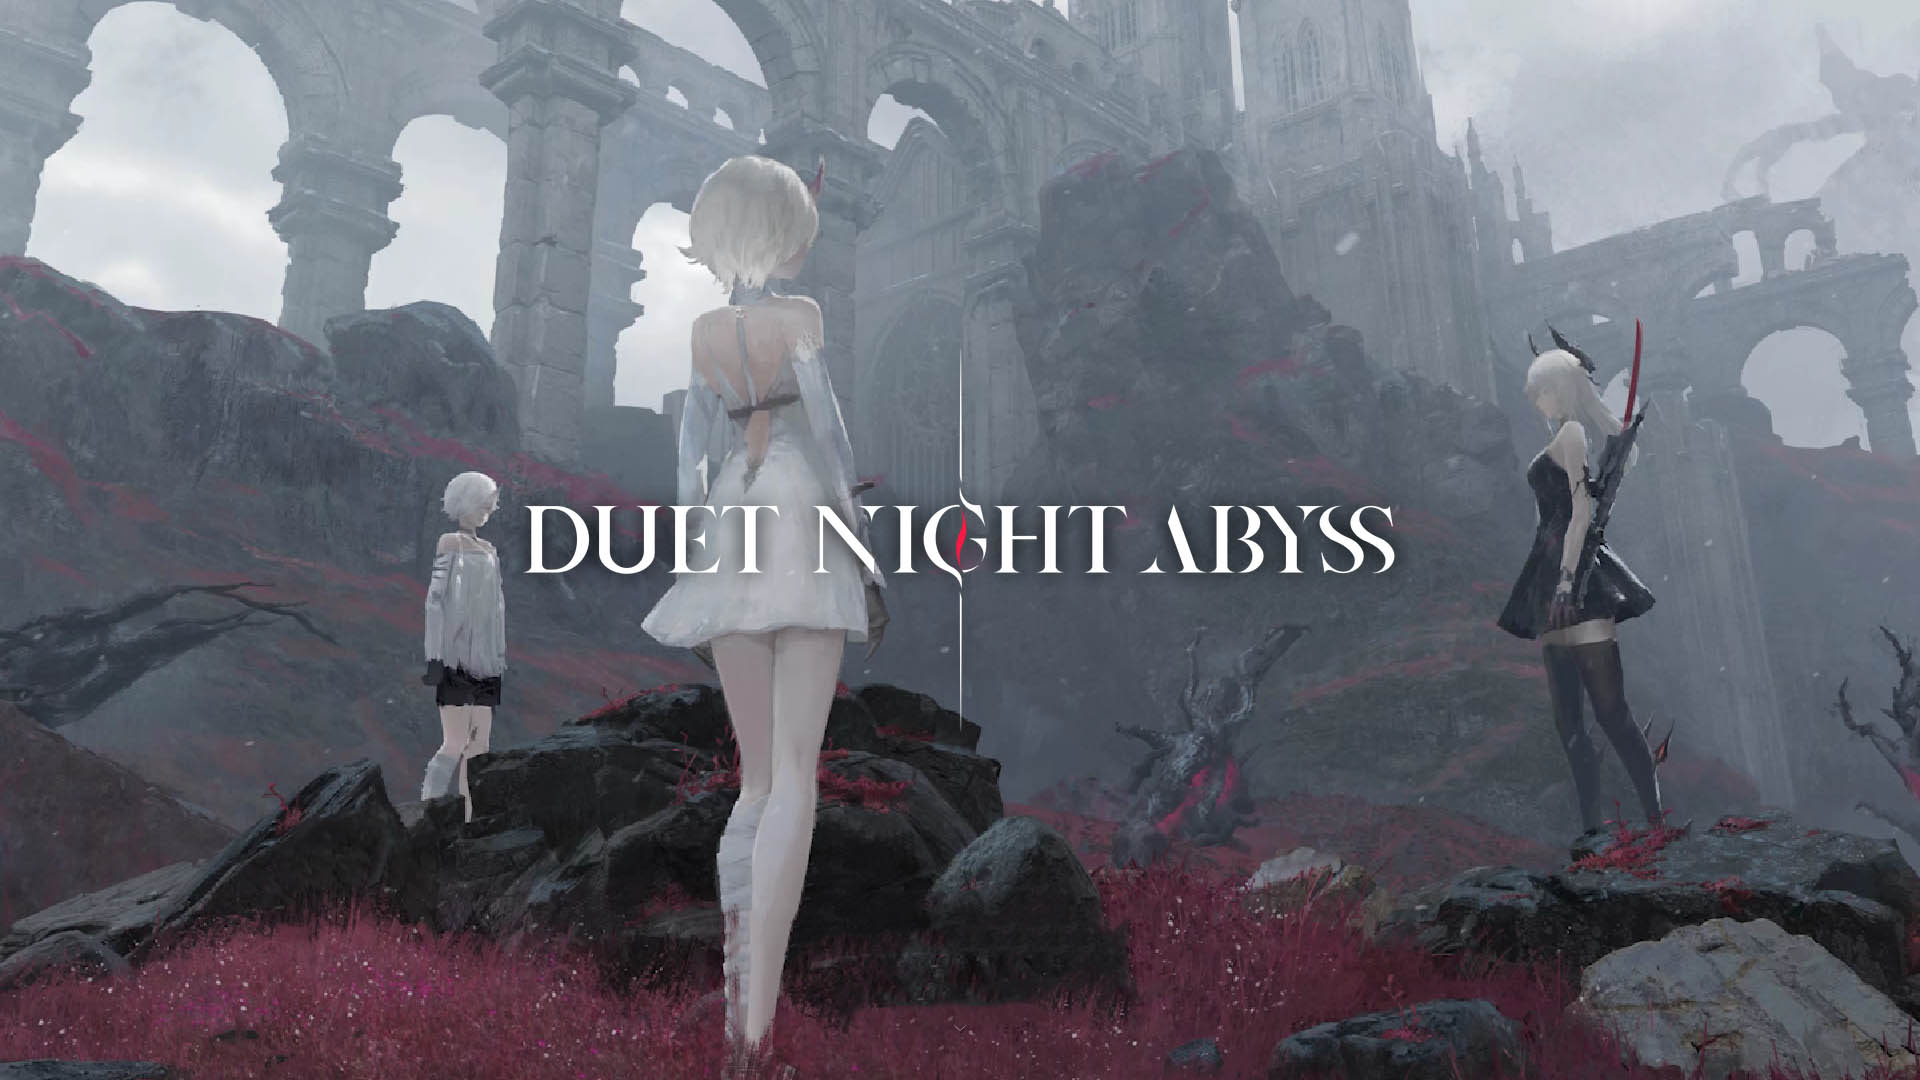 Fantasy RPG Duet Night Abyss announced